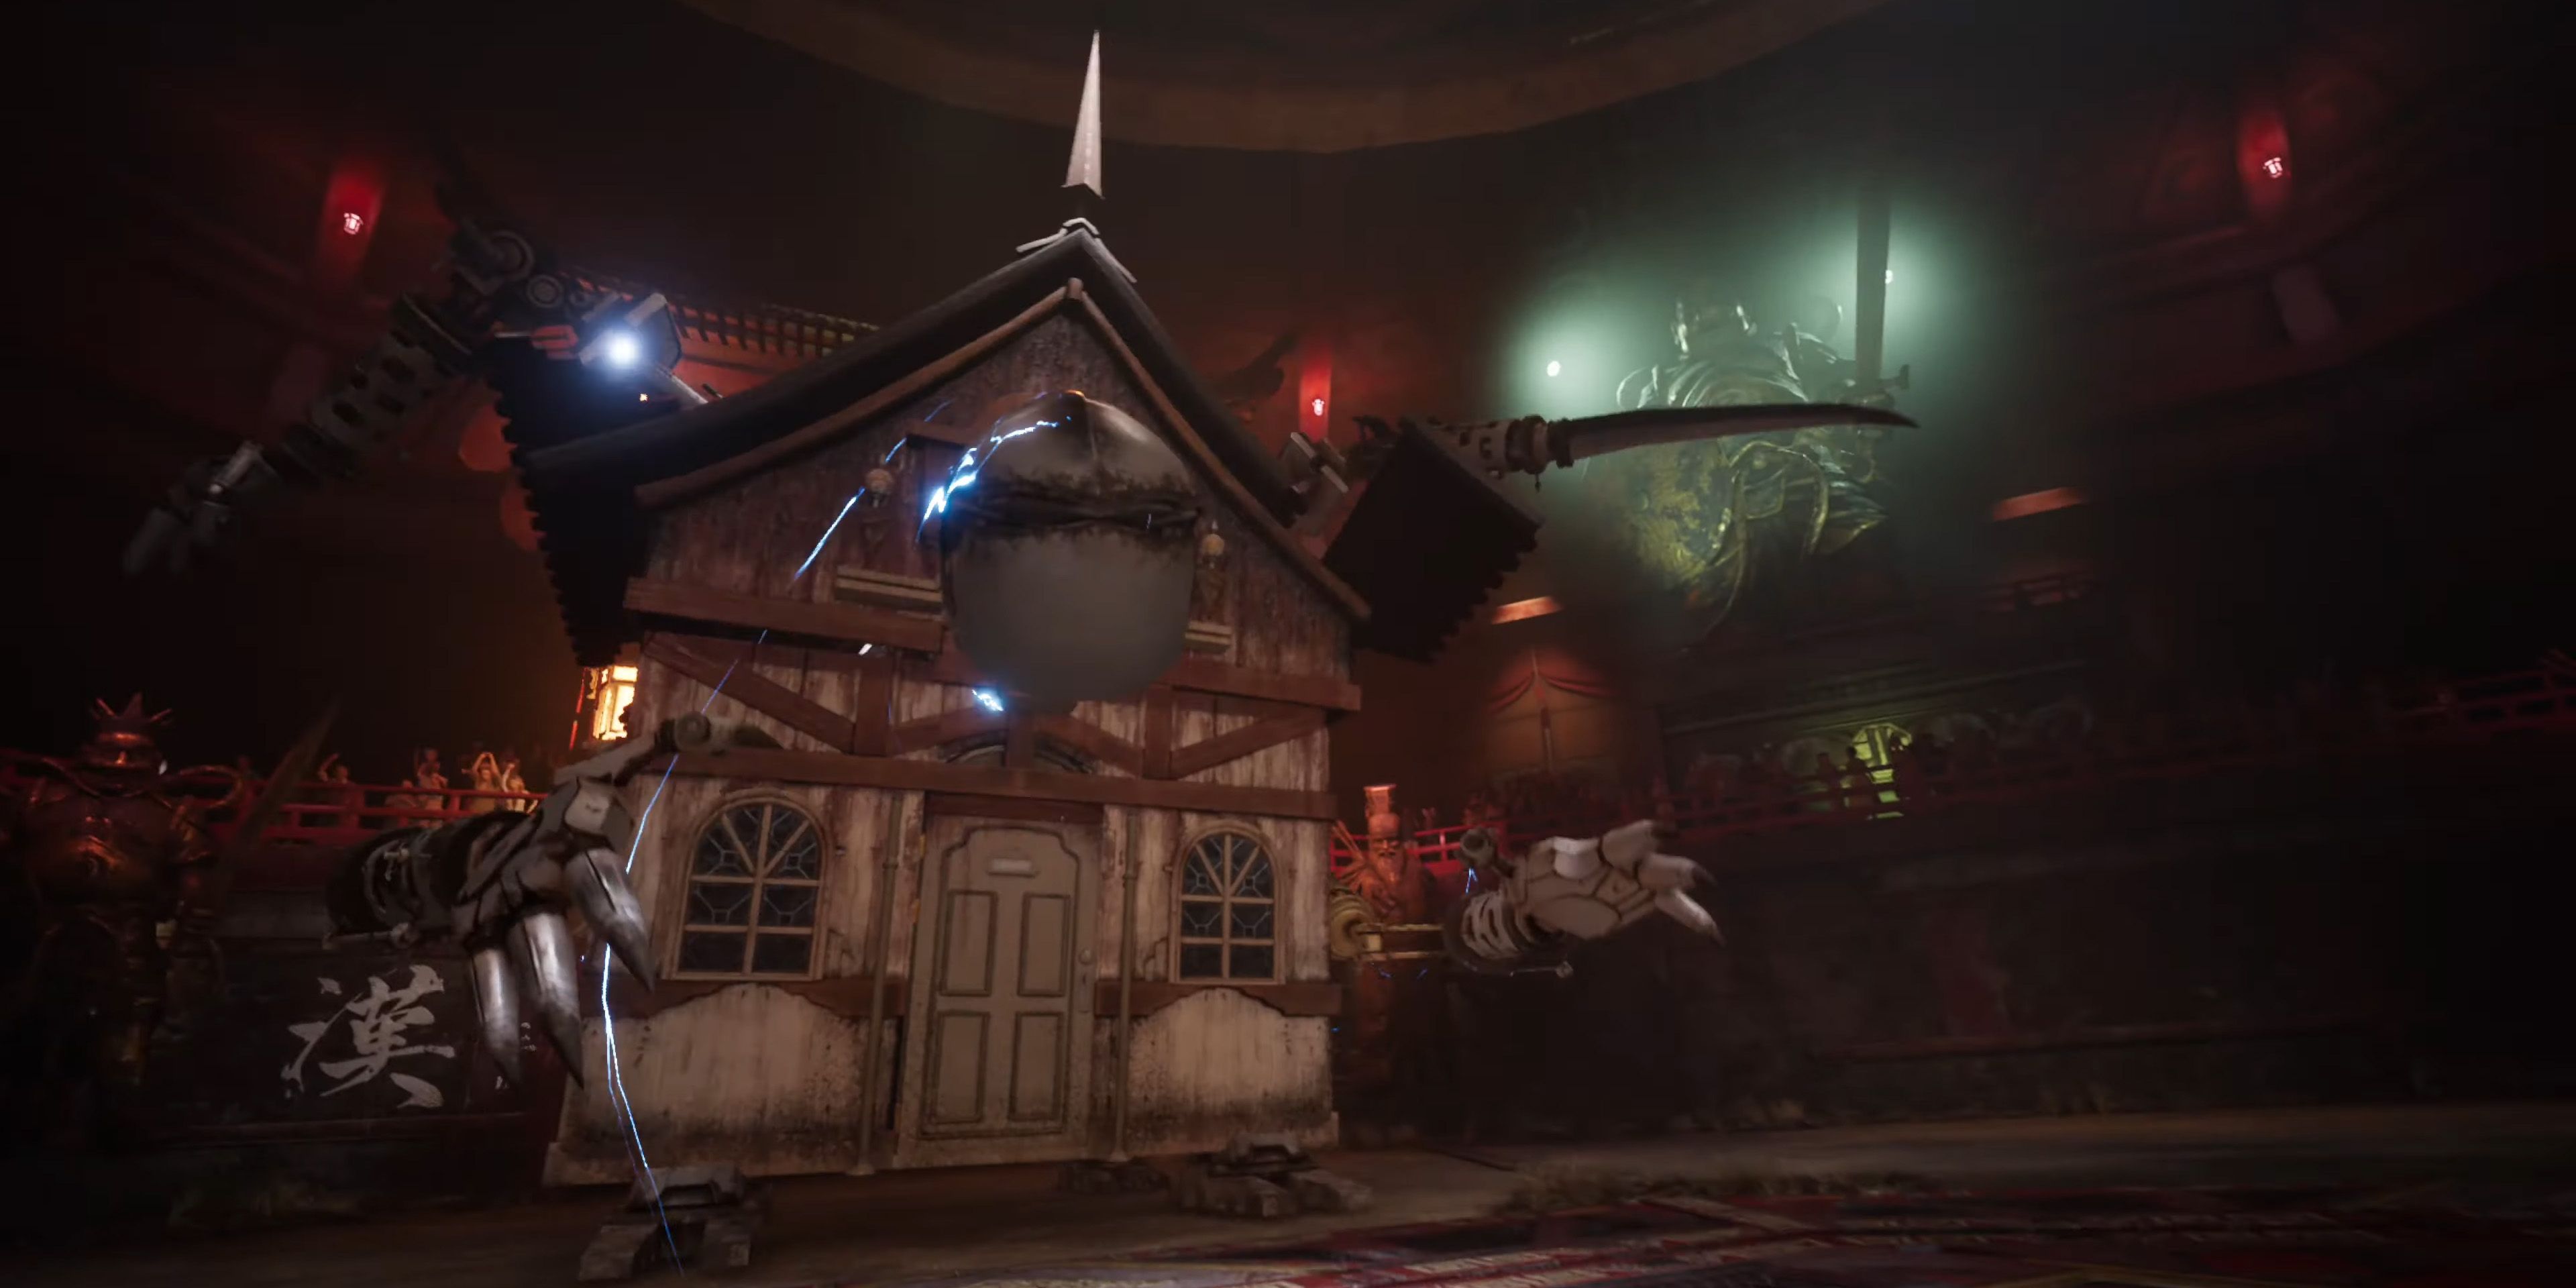 The third phase of the battle with the Hell House in Final Fantasy VII Remake